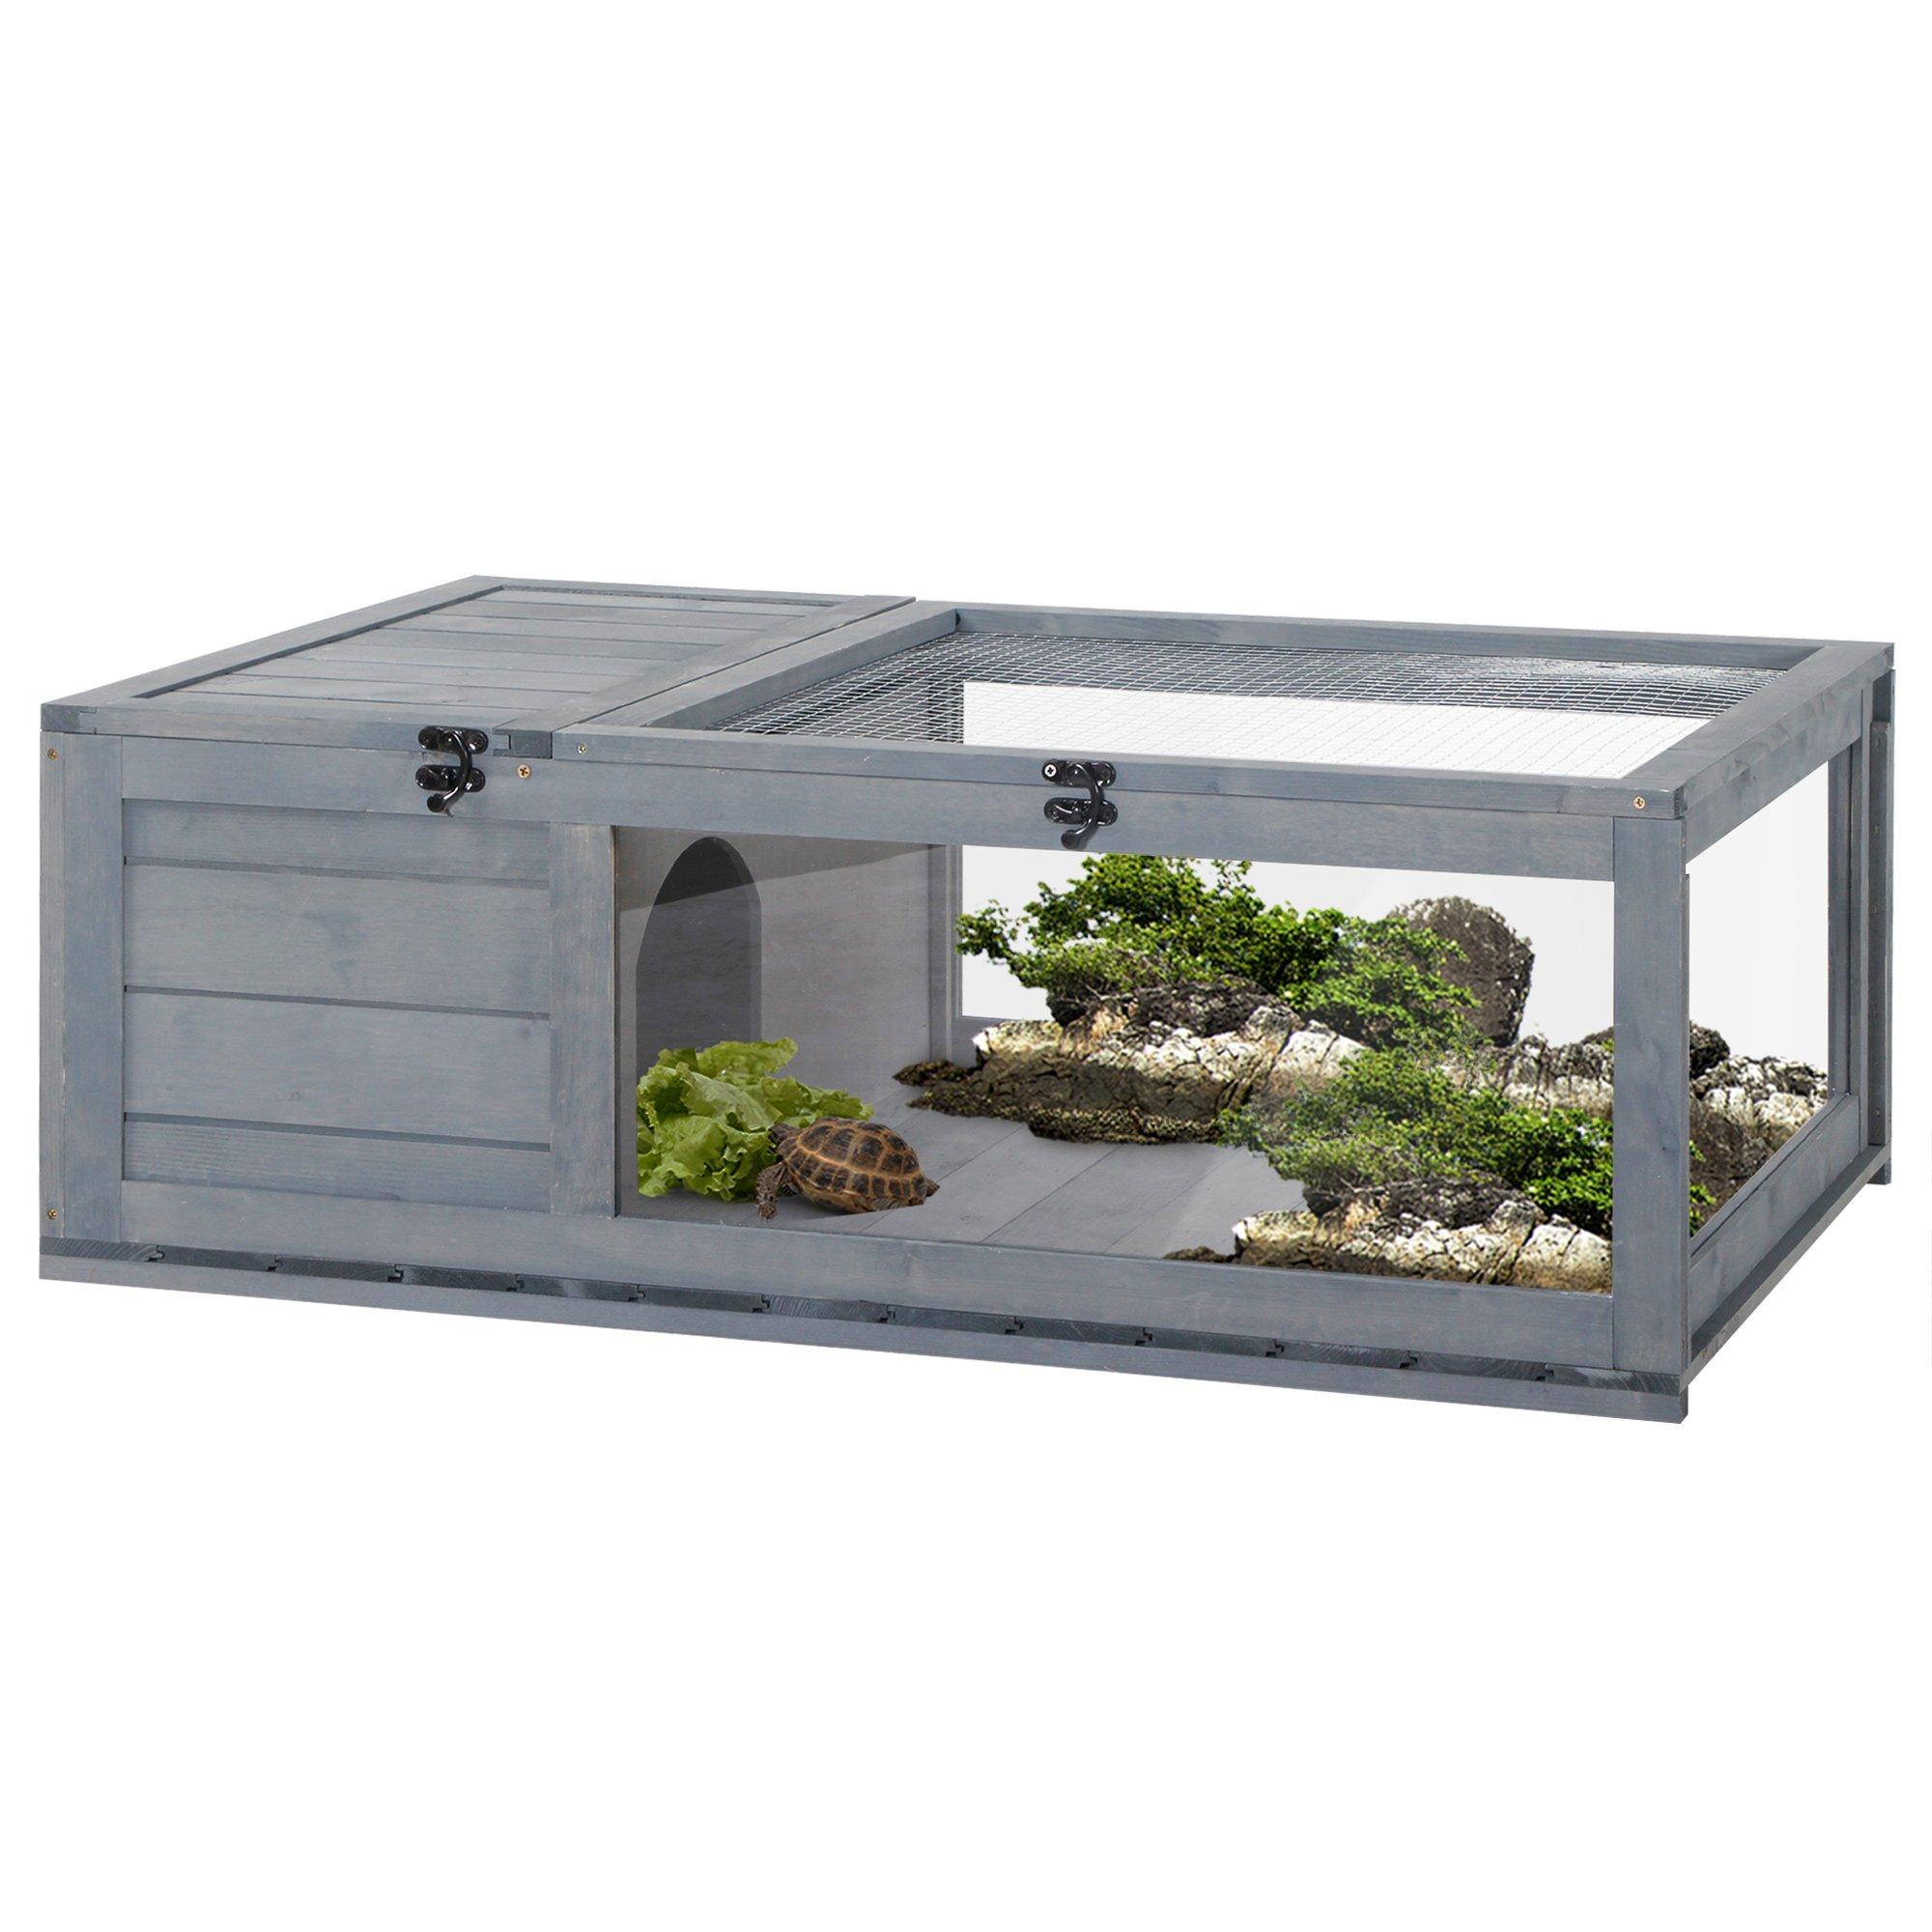 Tortoise House, Small Pet Reptile Wooden House with Mesh Roof